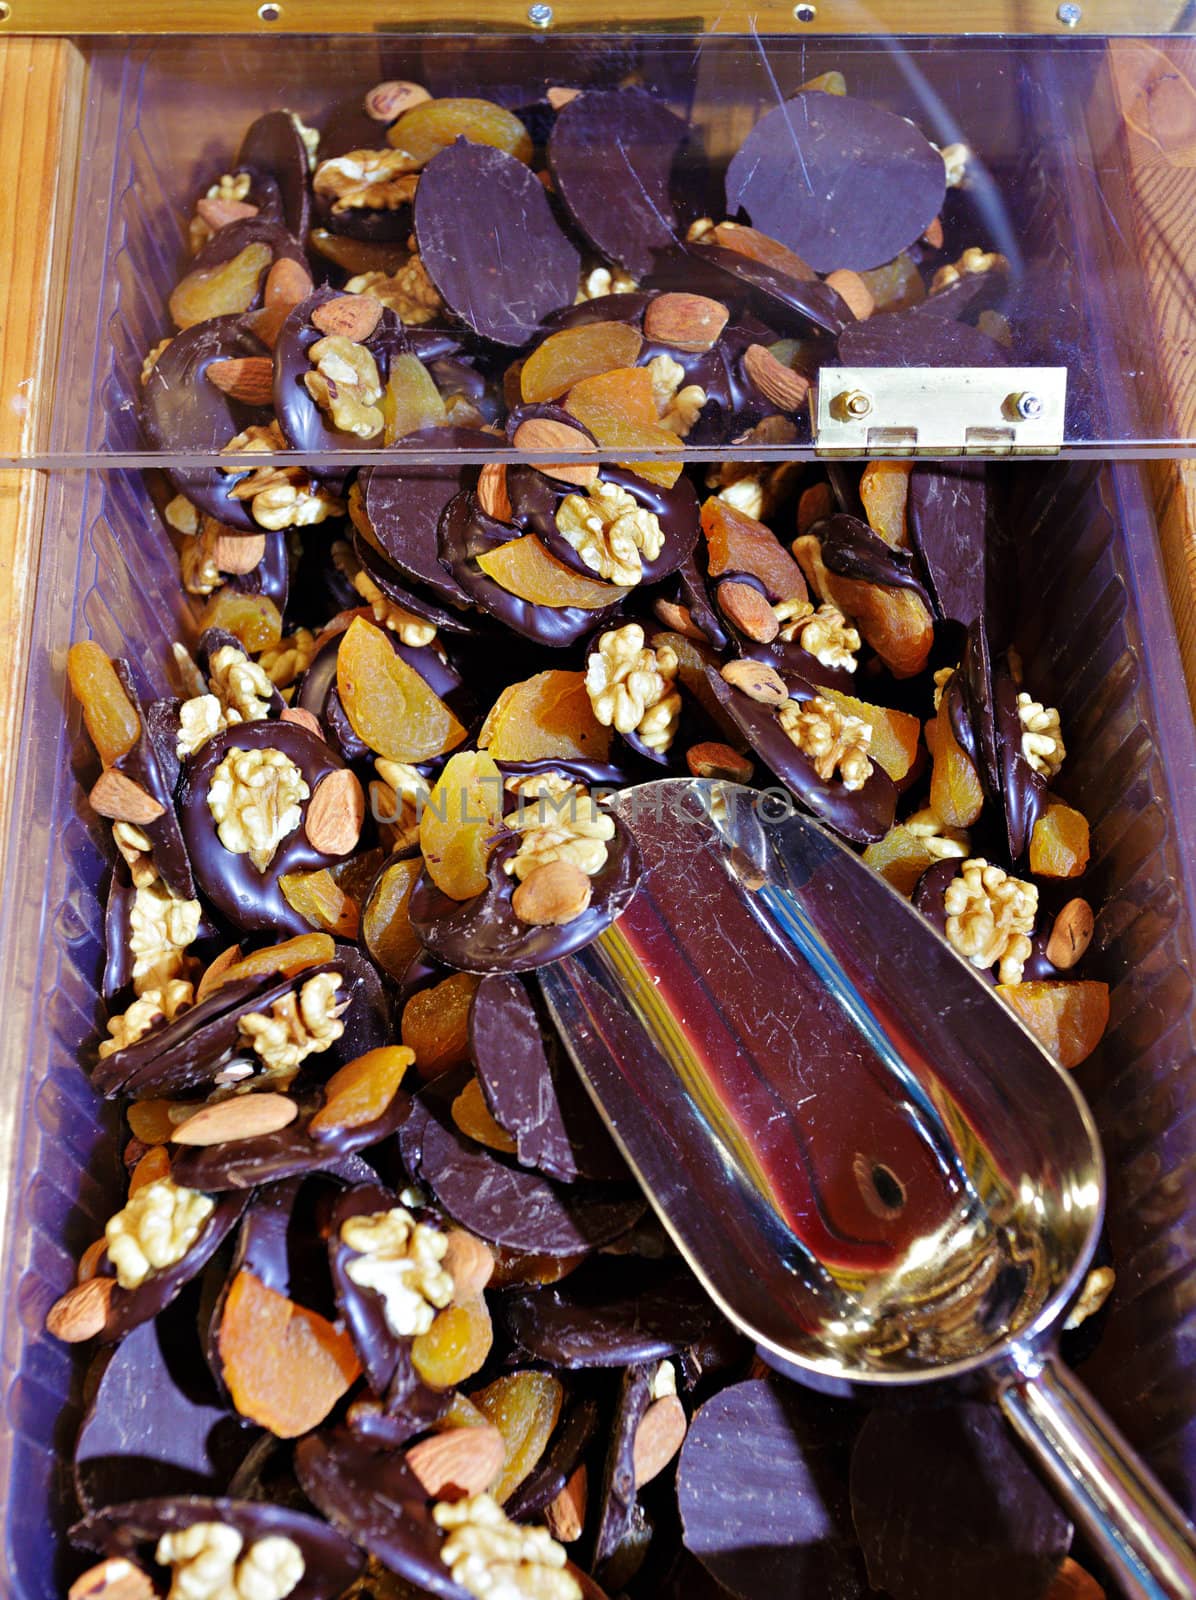 Fruit, chocolate and nuts. Delicious combination on a counter in a store.